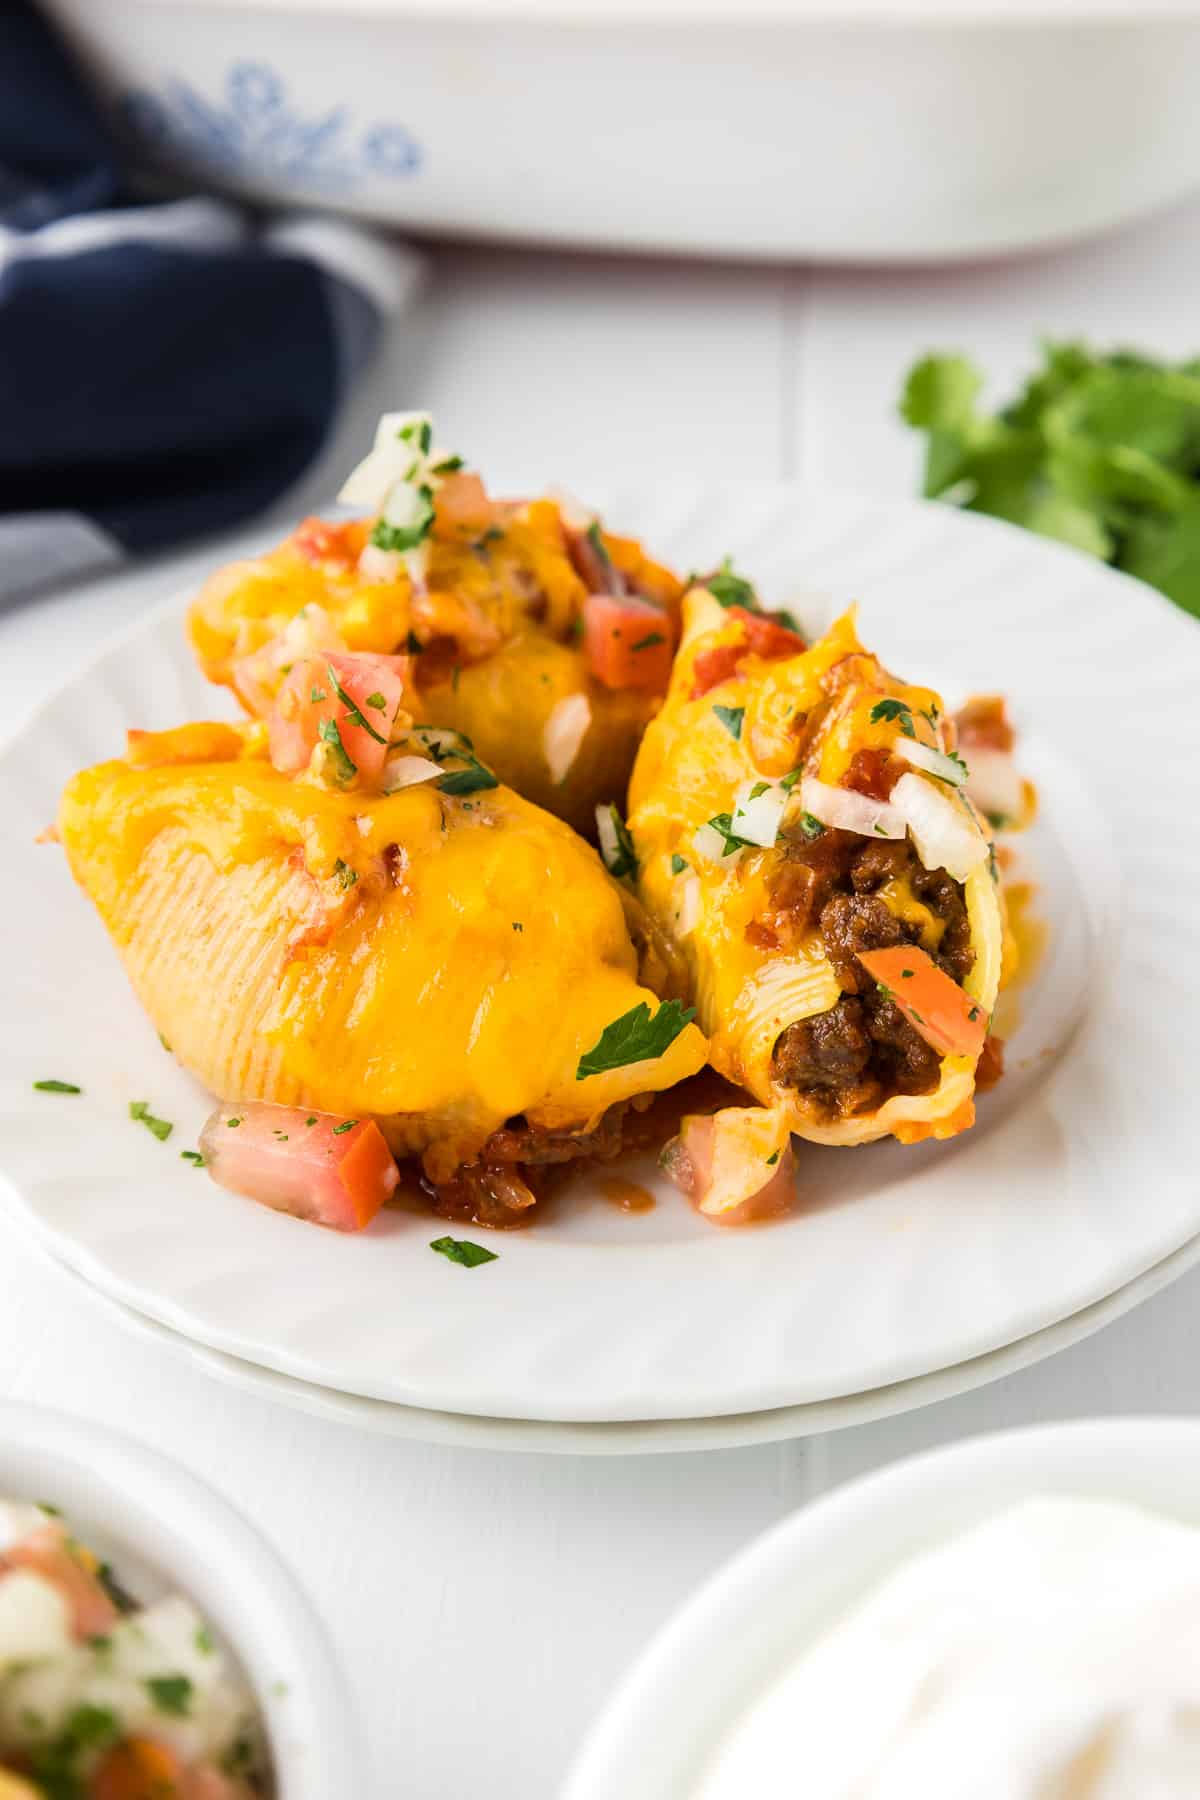 Three Mexican stuffed shells on a plate with salsa and one shell with a bite missing.